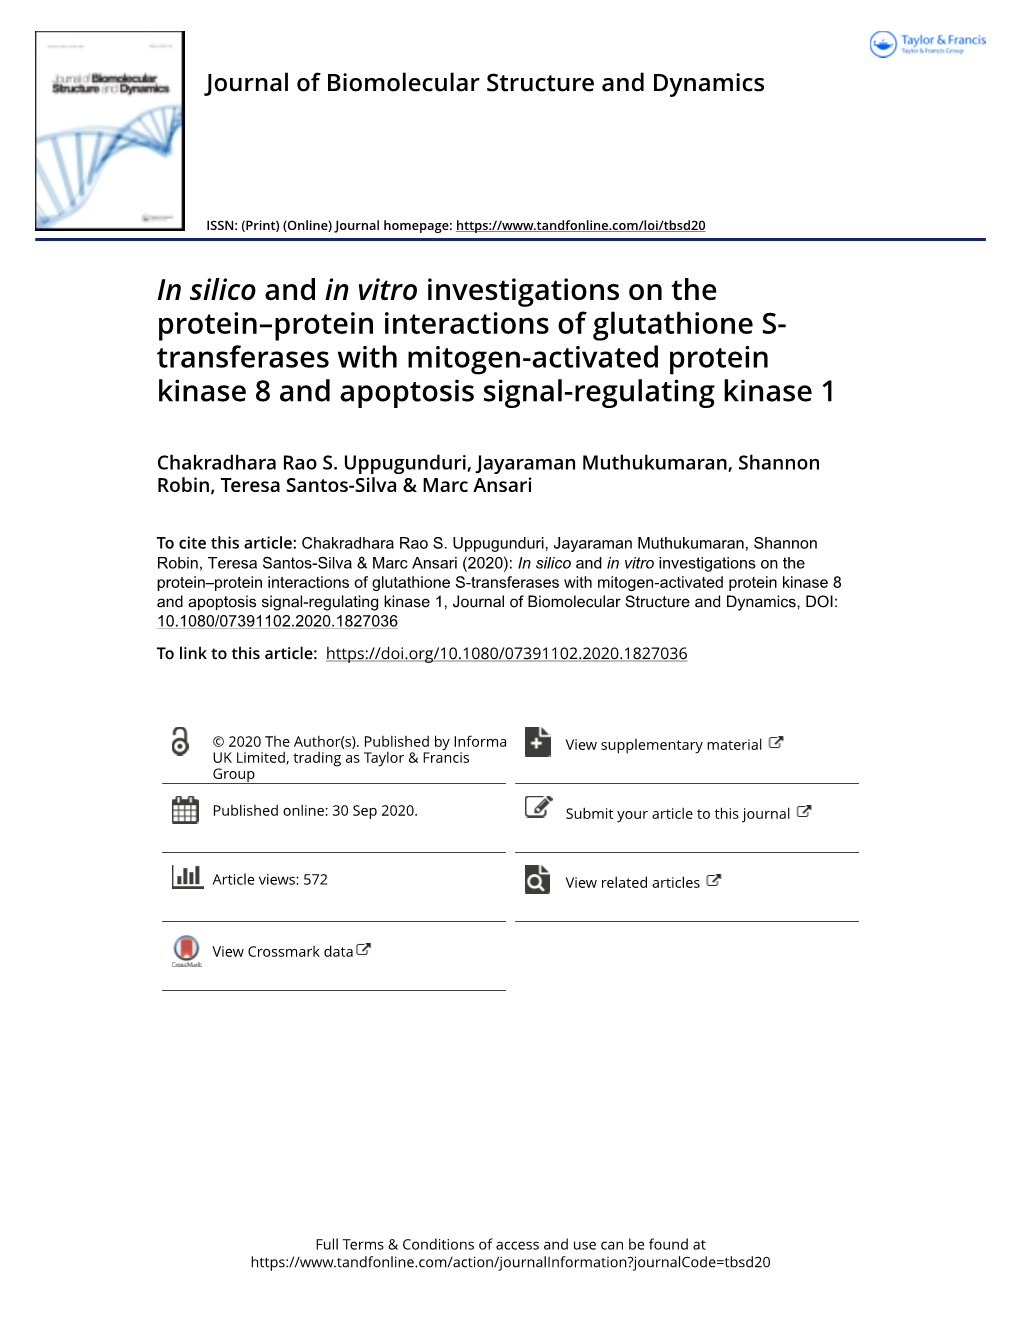 In Silico and in Vitro Investigations on the Protein–Protein